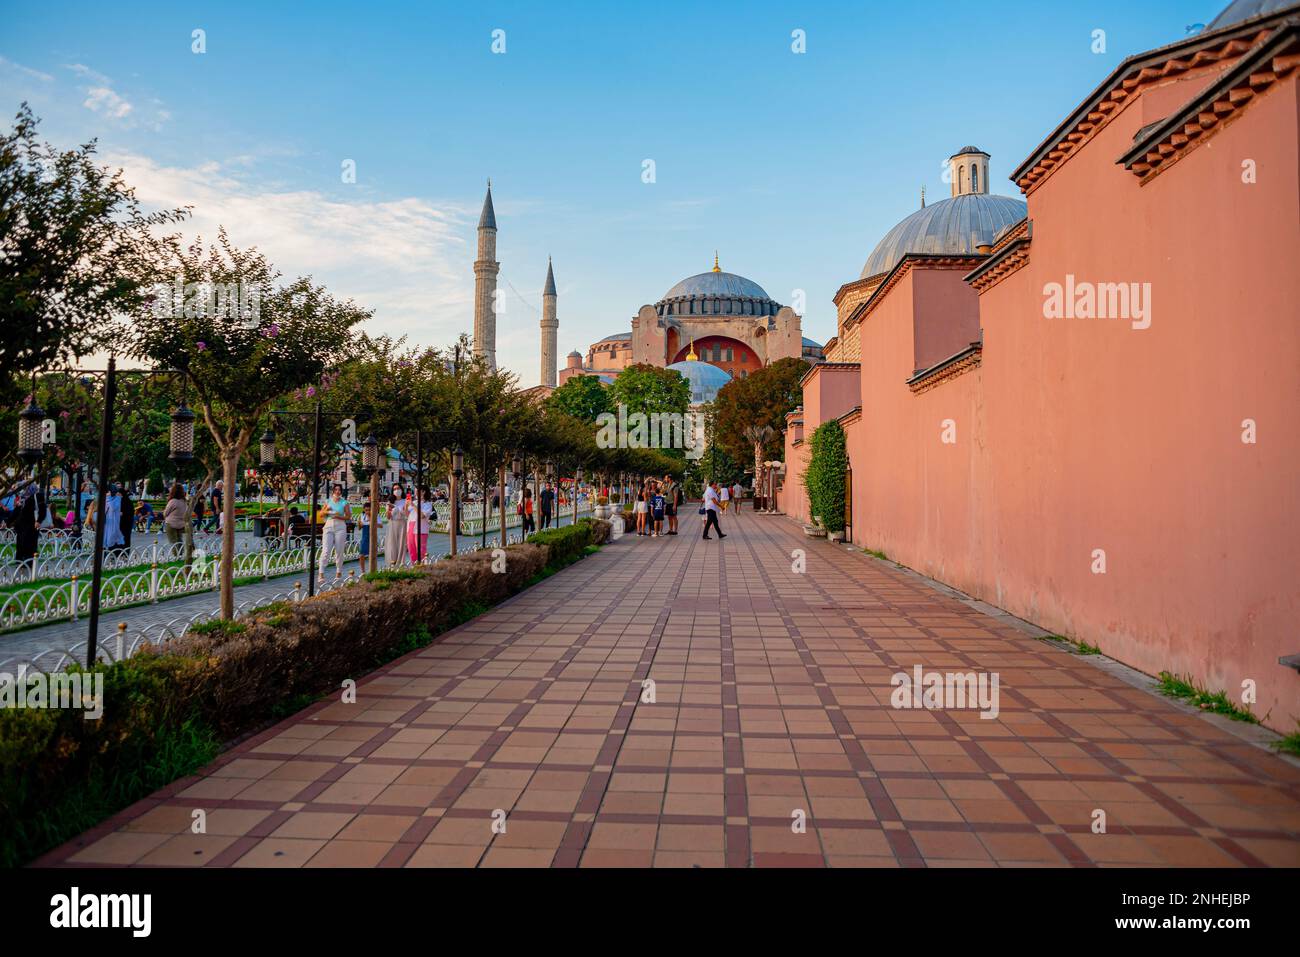 istanbul turkey 8 november 2021 : Hagia Sophia, one of the symbols of Istanbul , The view of the historical Hagia Sophia from Sultan Ahmet Square. Hig Stock Photo